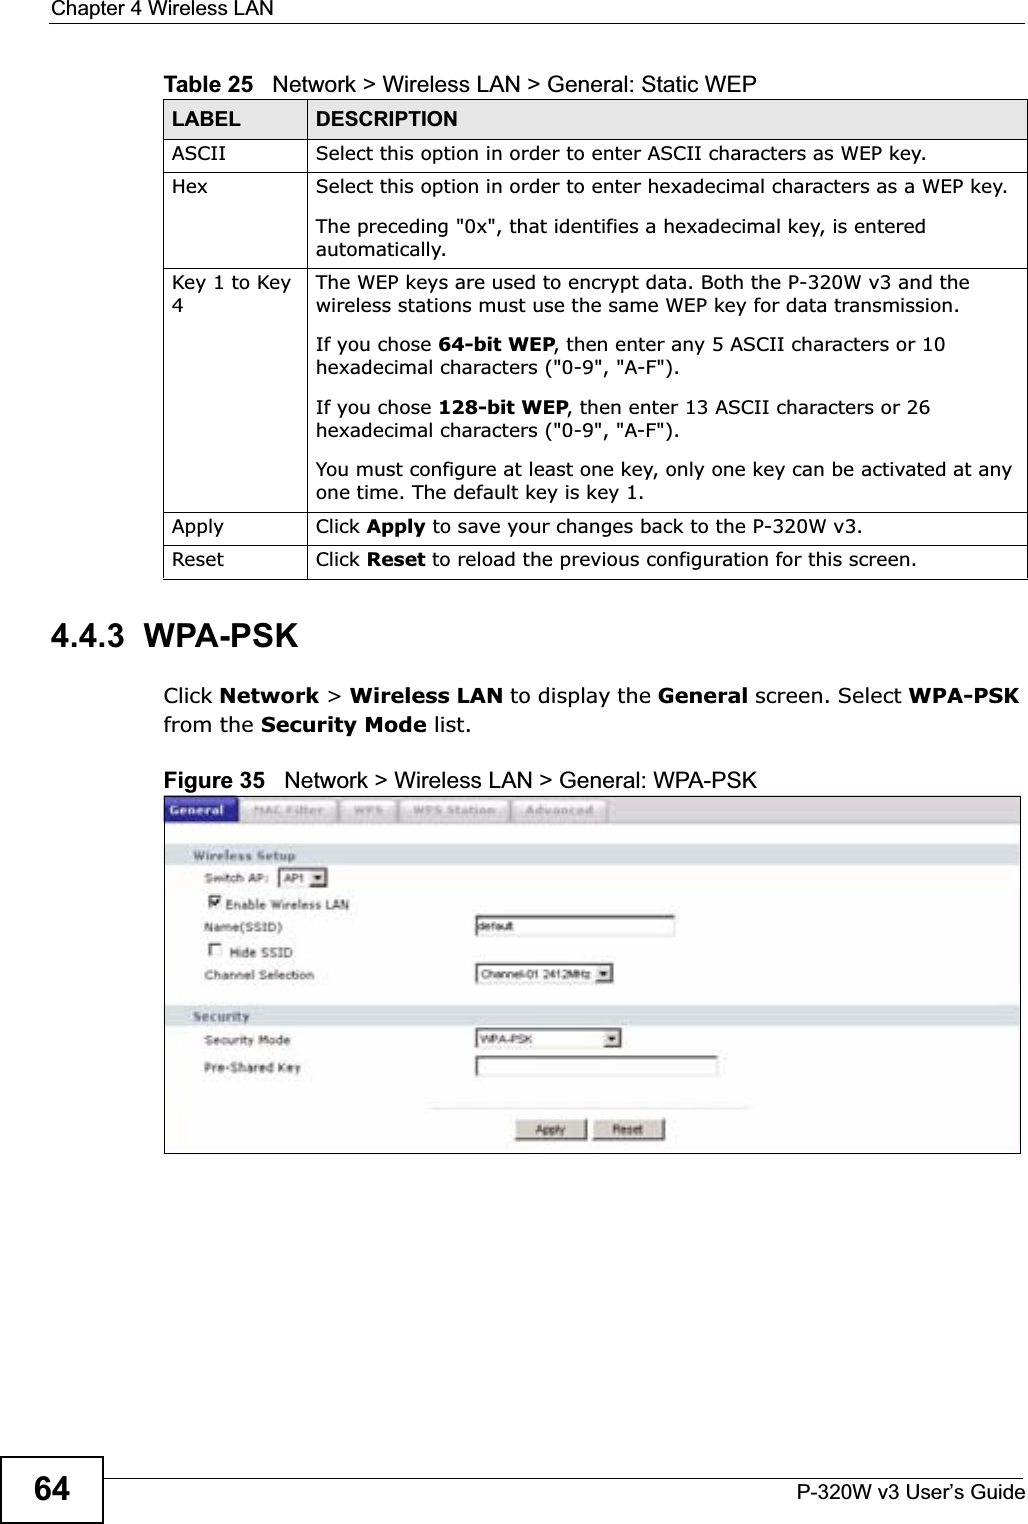 Chapter 4 Wireless LANP-320W v3 User’s Guide644.4.3  WPA-PSKClick Network &gt; Wireless LAN to display the General screen. Select WPA-PSKfrom the Security Mode list.Figure 35   Network &gt; Wireless LAN &gt; General: WPA-PSKASCII Select this option in order to enter ASCII characters as WEP key. Hex Select this option in order to enter hexadecimal characters as a WEP key. The preceding &quot;0x&quot;, that identifies a hexadecimal key, is entered automatically.Key 1 to Key 4The WEP keys are used to encrypt data. Both the P-320W v3 and the wireless stations must use the same WEP key for data transmission.If you chose 64-bit WEP, then enter any 5 ASCII characters or 10 hexadecimal characters (&quot;0-9&quot;, &quot;A-F&quot;).If you chose 128-bit WEP, then enter 13 ASCII characters or 26 hexadecimal characters (&quot;0-9&quot;, &quot;A-F&quot;). You must configure at least one key, only one key can be activated at any one time. The default key is key 1.Apply Click Apply to save your changes back to the P-320W v3.Reset Click Reset to reload the previous configuration for this screen.Table 25   Network &gt; Wireless LAN &gt; General: Static WEPLABEL DESCRIPTION